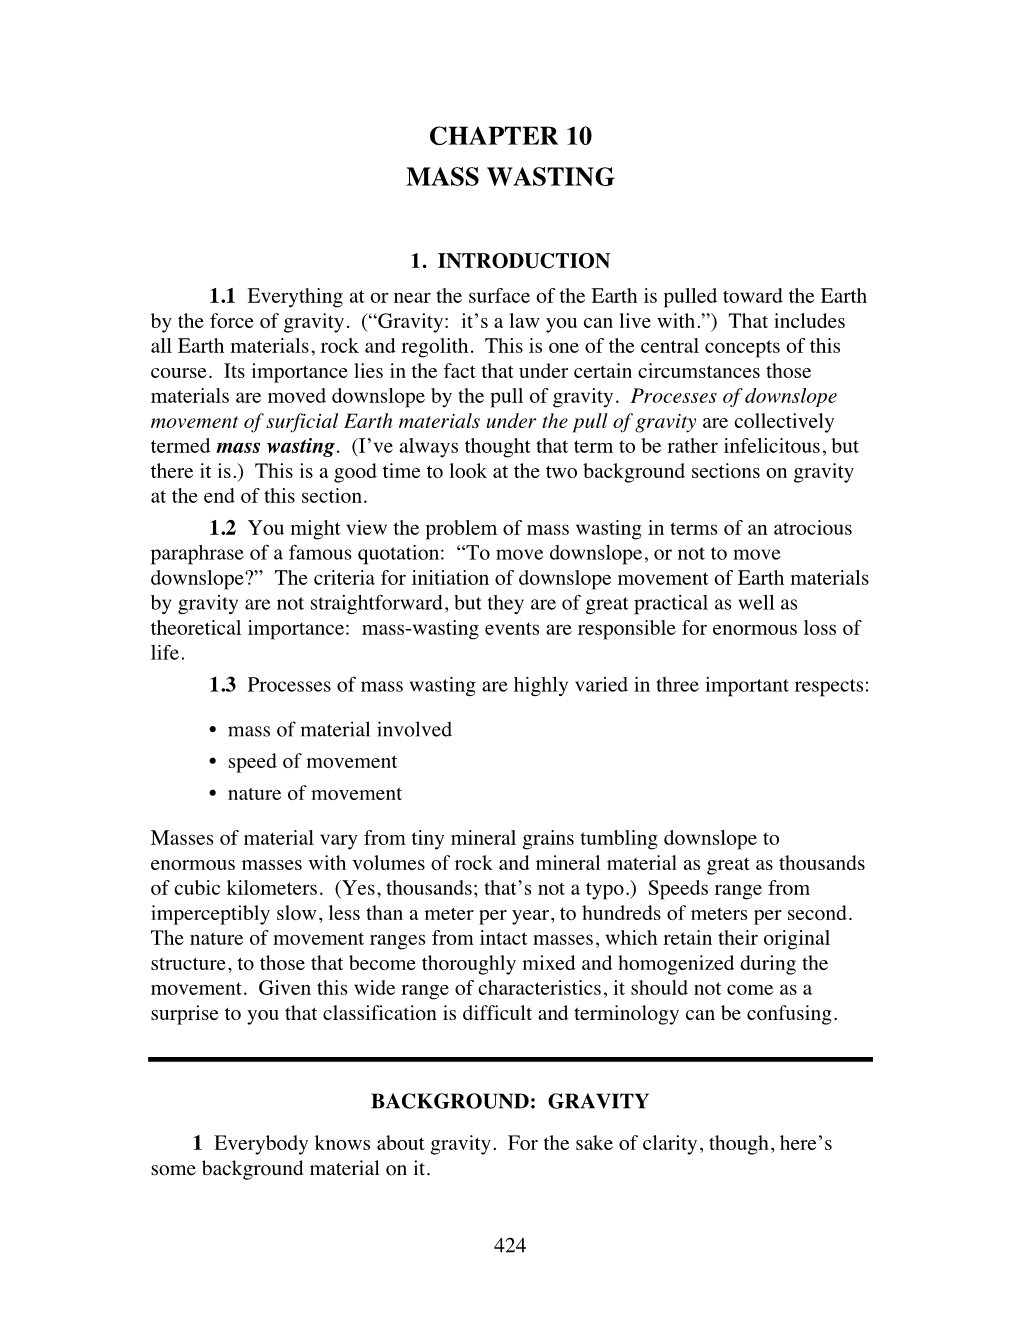 Chapter 10 Mass Wasting